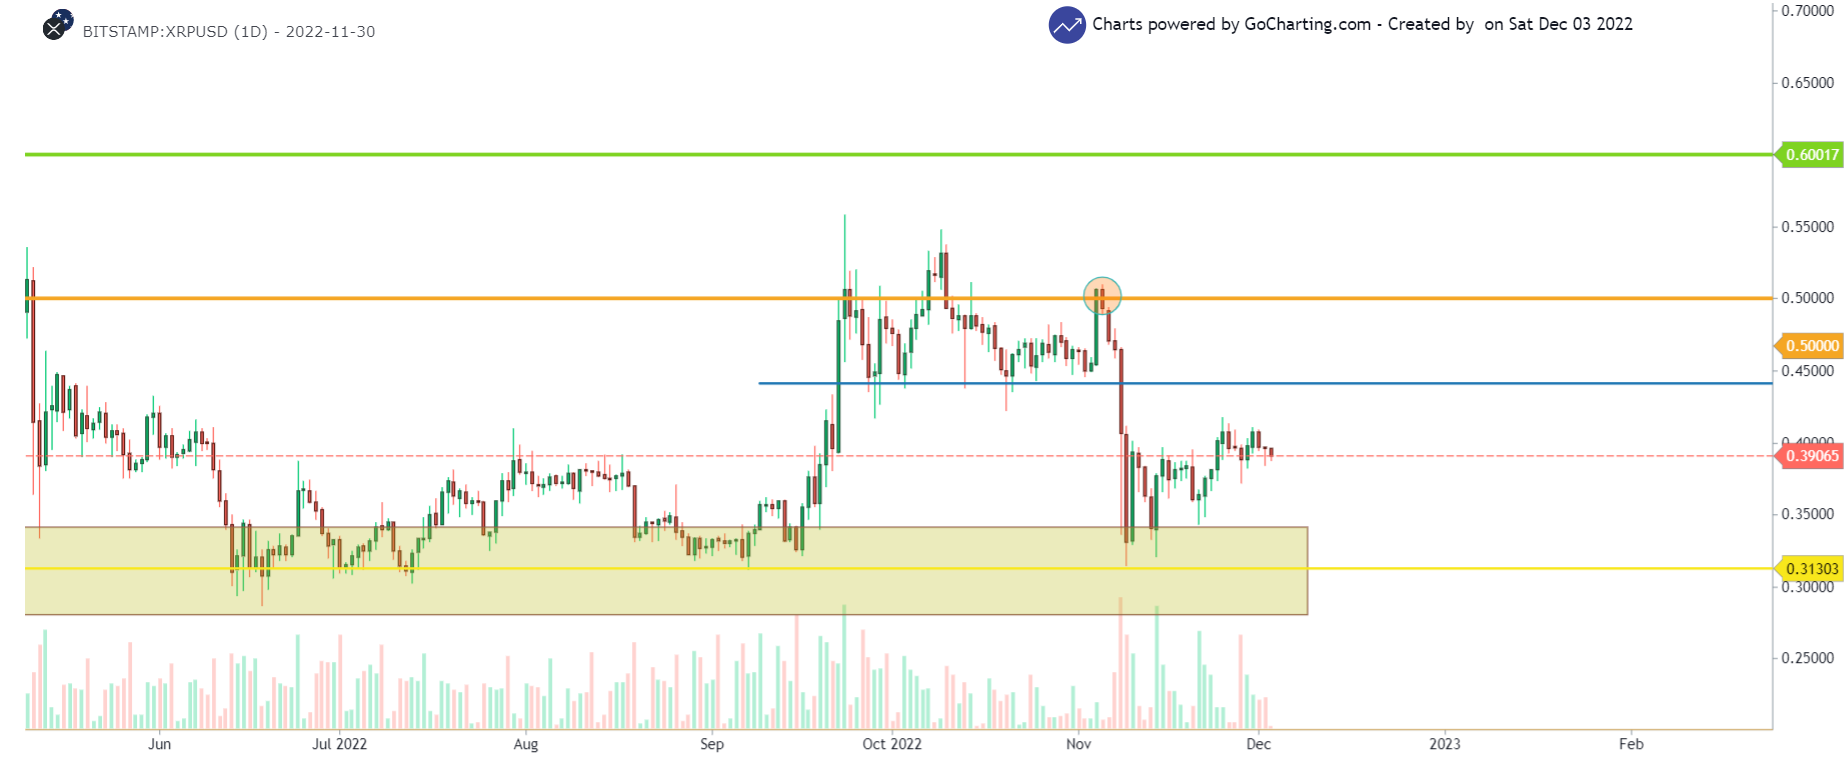 XRP/USD 1-day chart showing the price-action of XRP